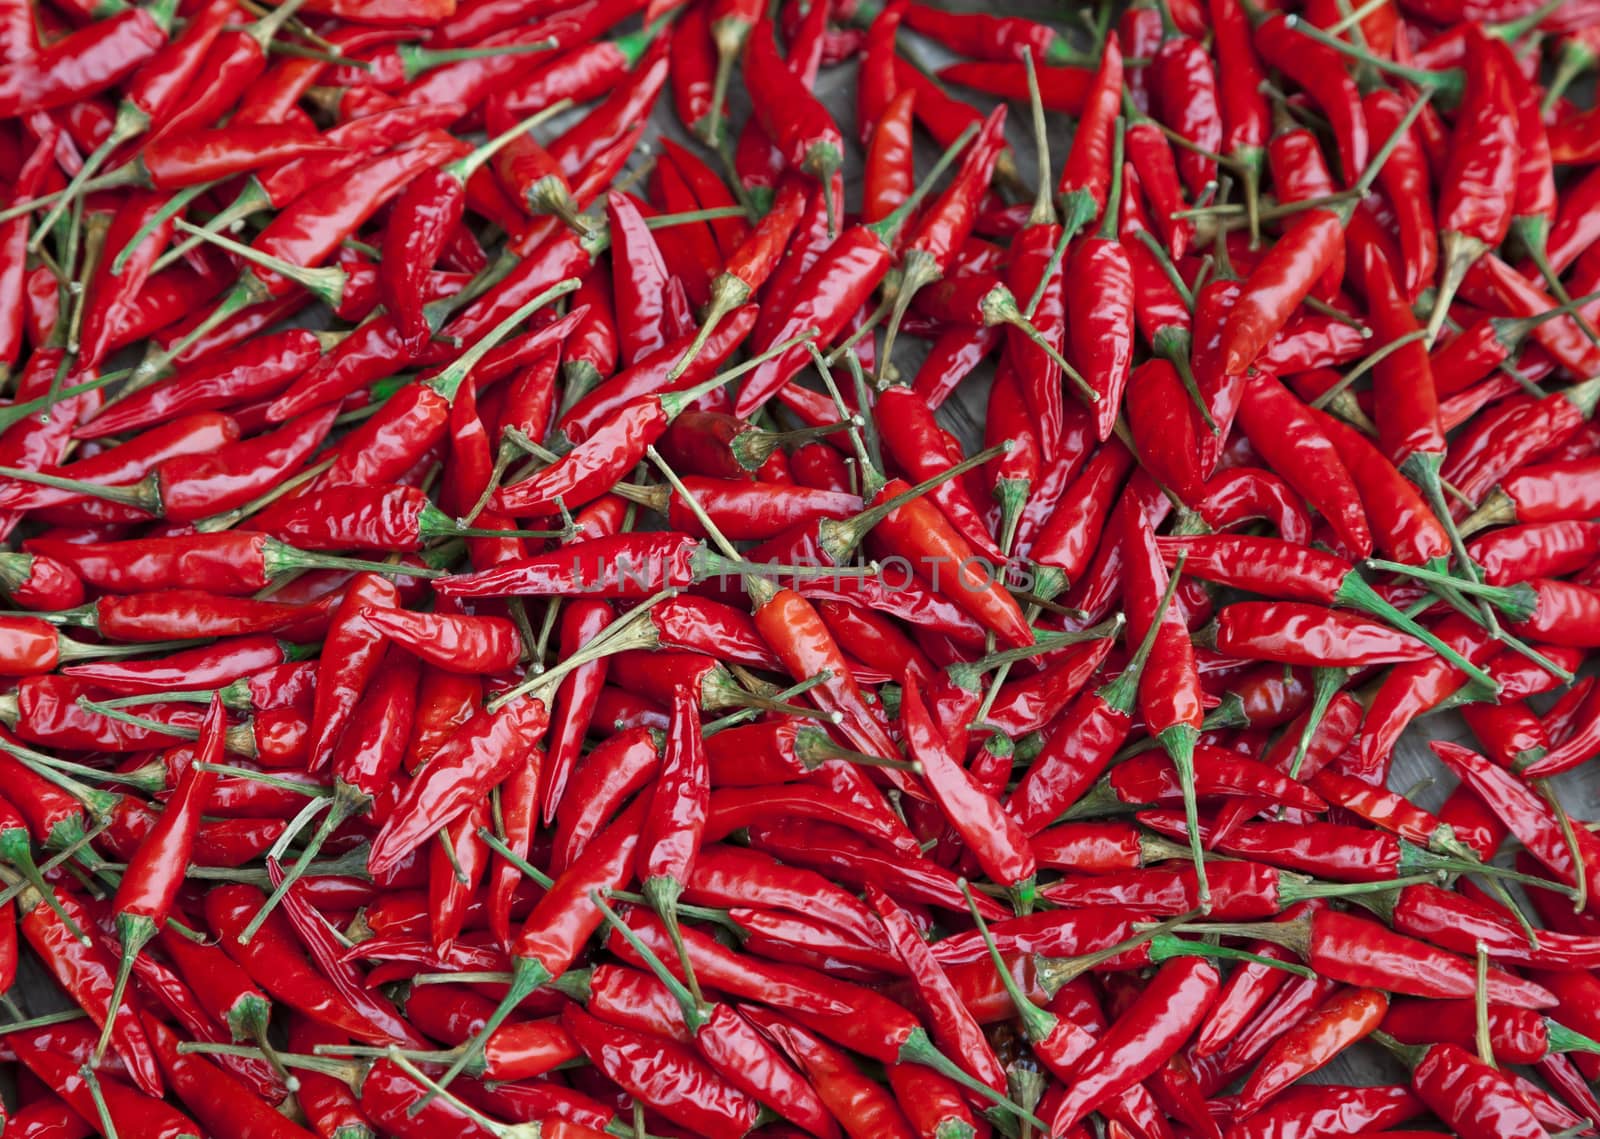 Many red chili peppers filling the frame